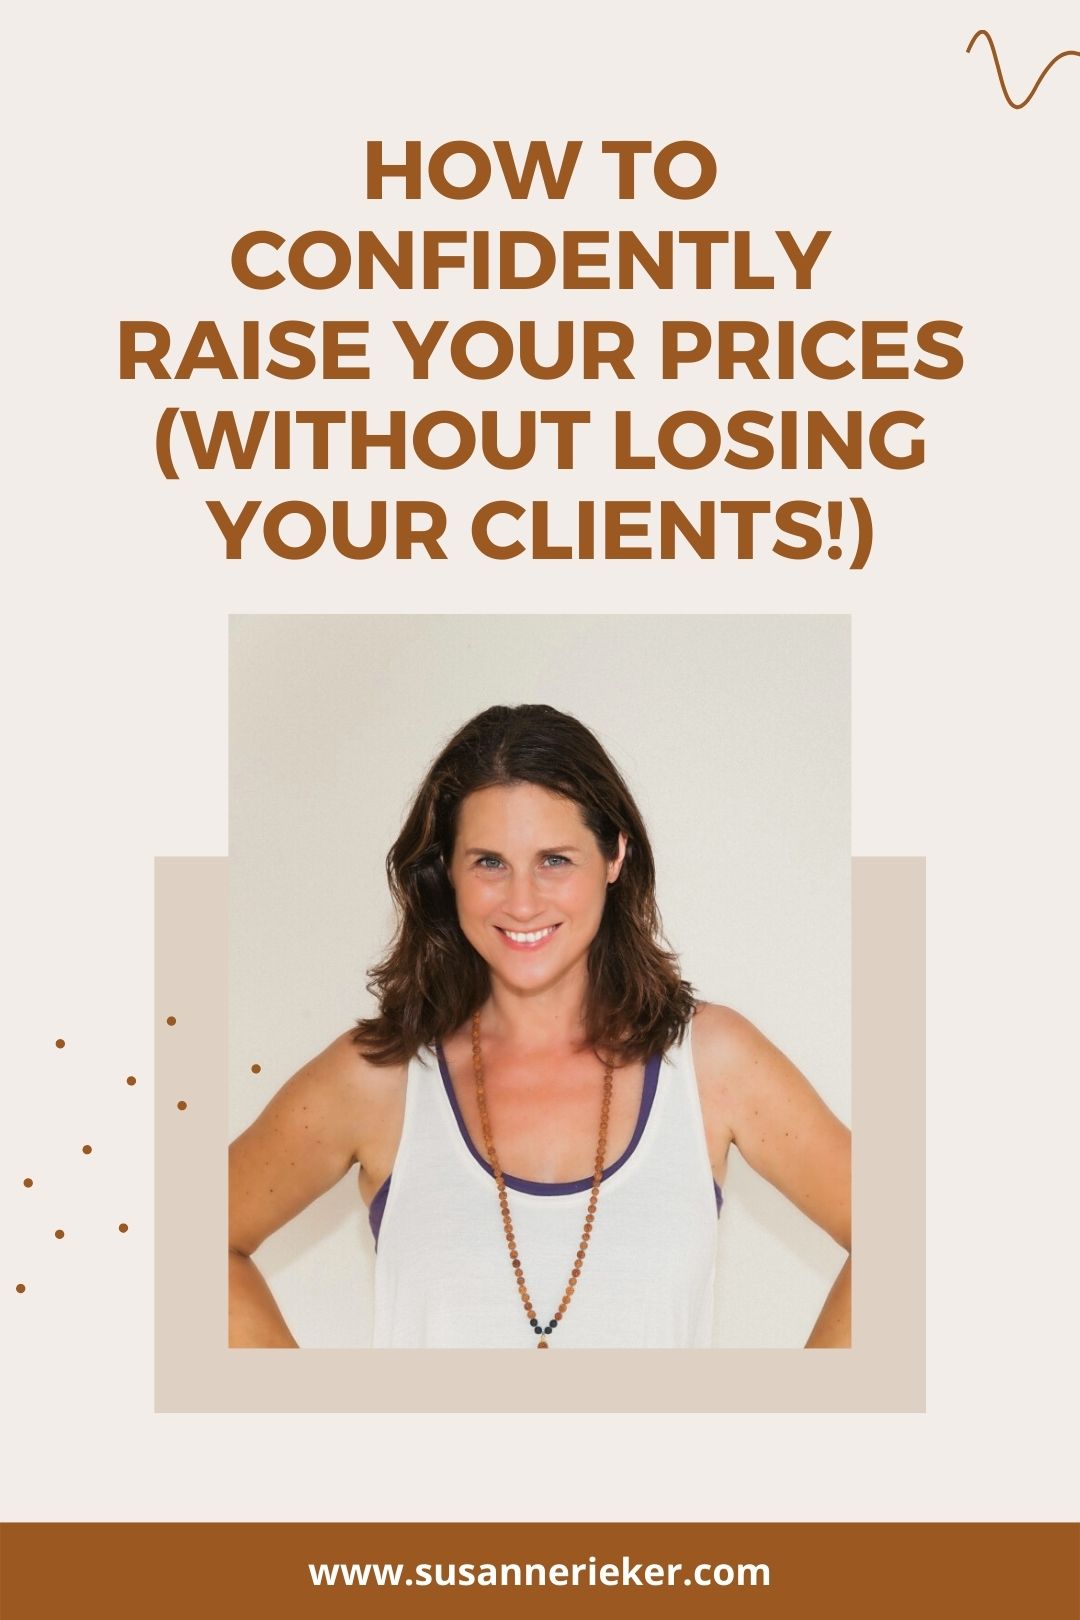 Susanne Rieker Pinterest Graphic about How to Confidently Raise your Prices (Without Losing your Clients!)